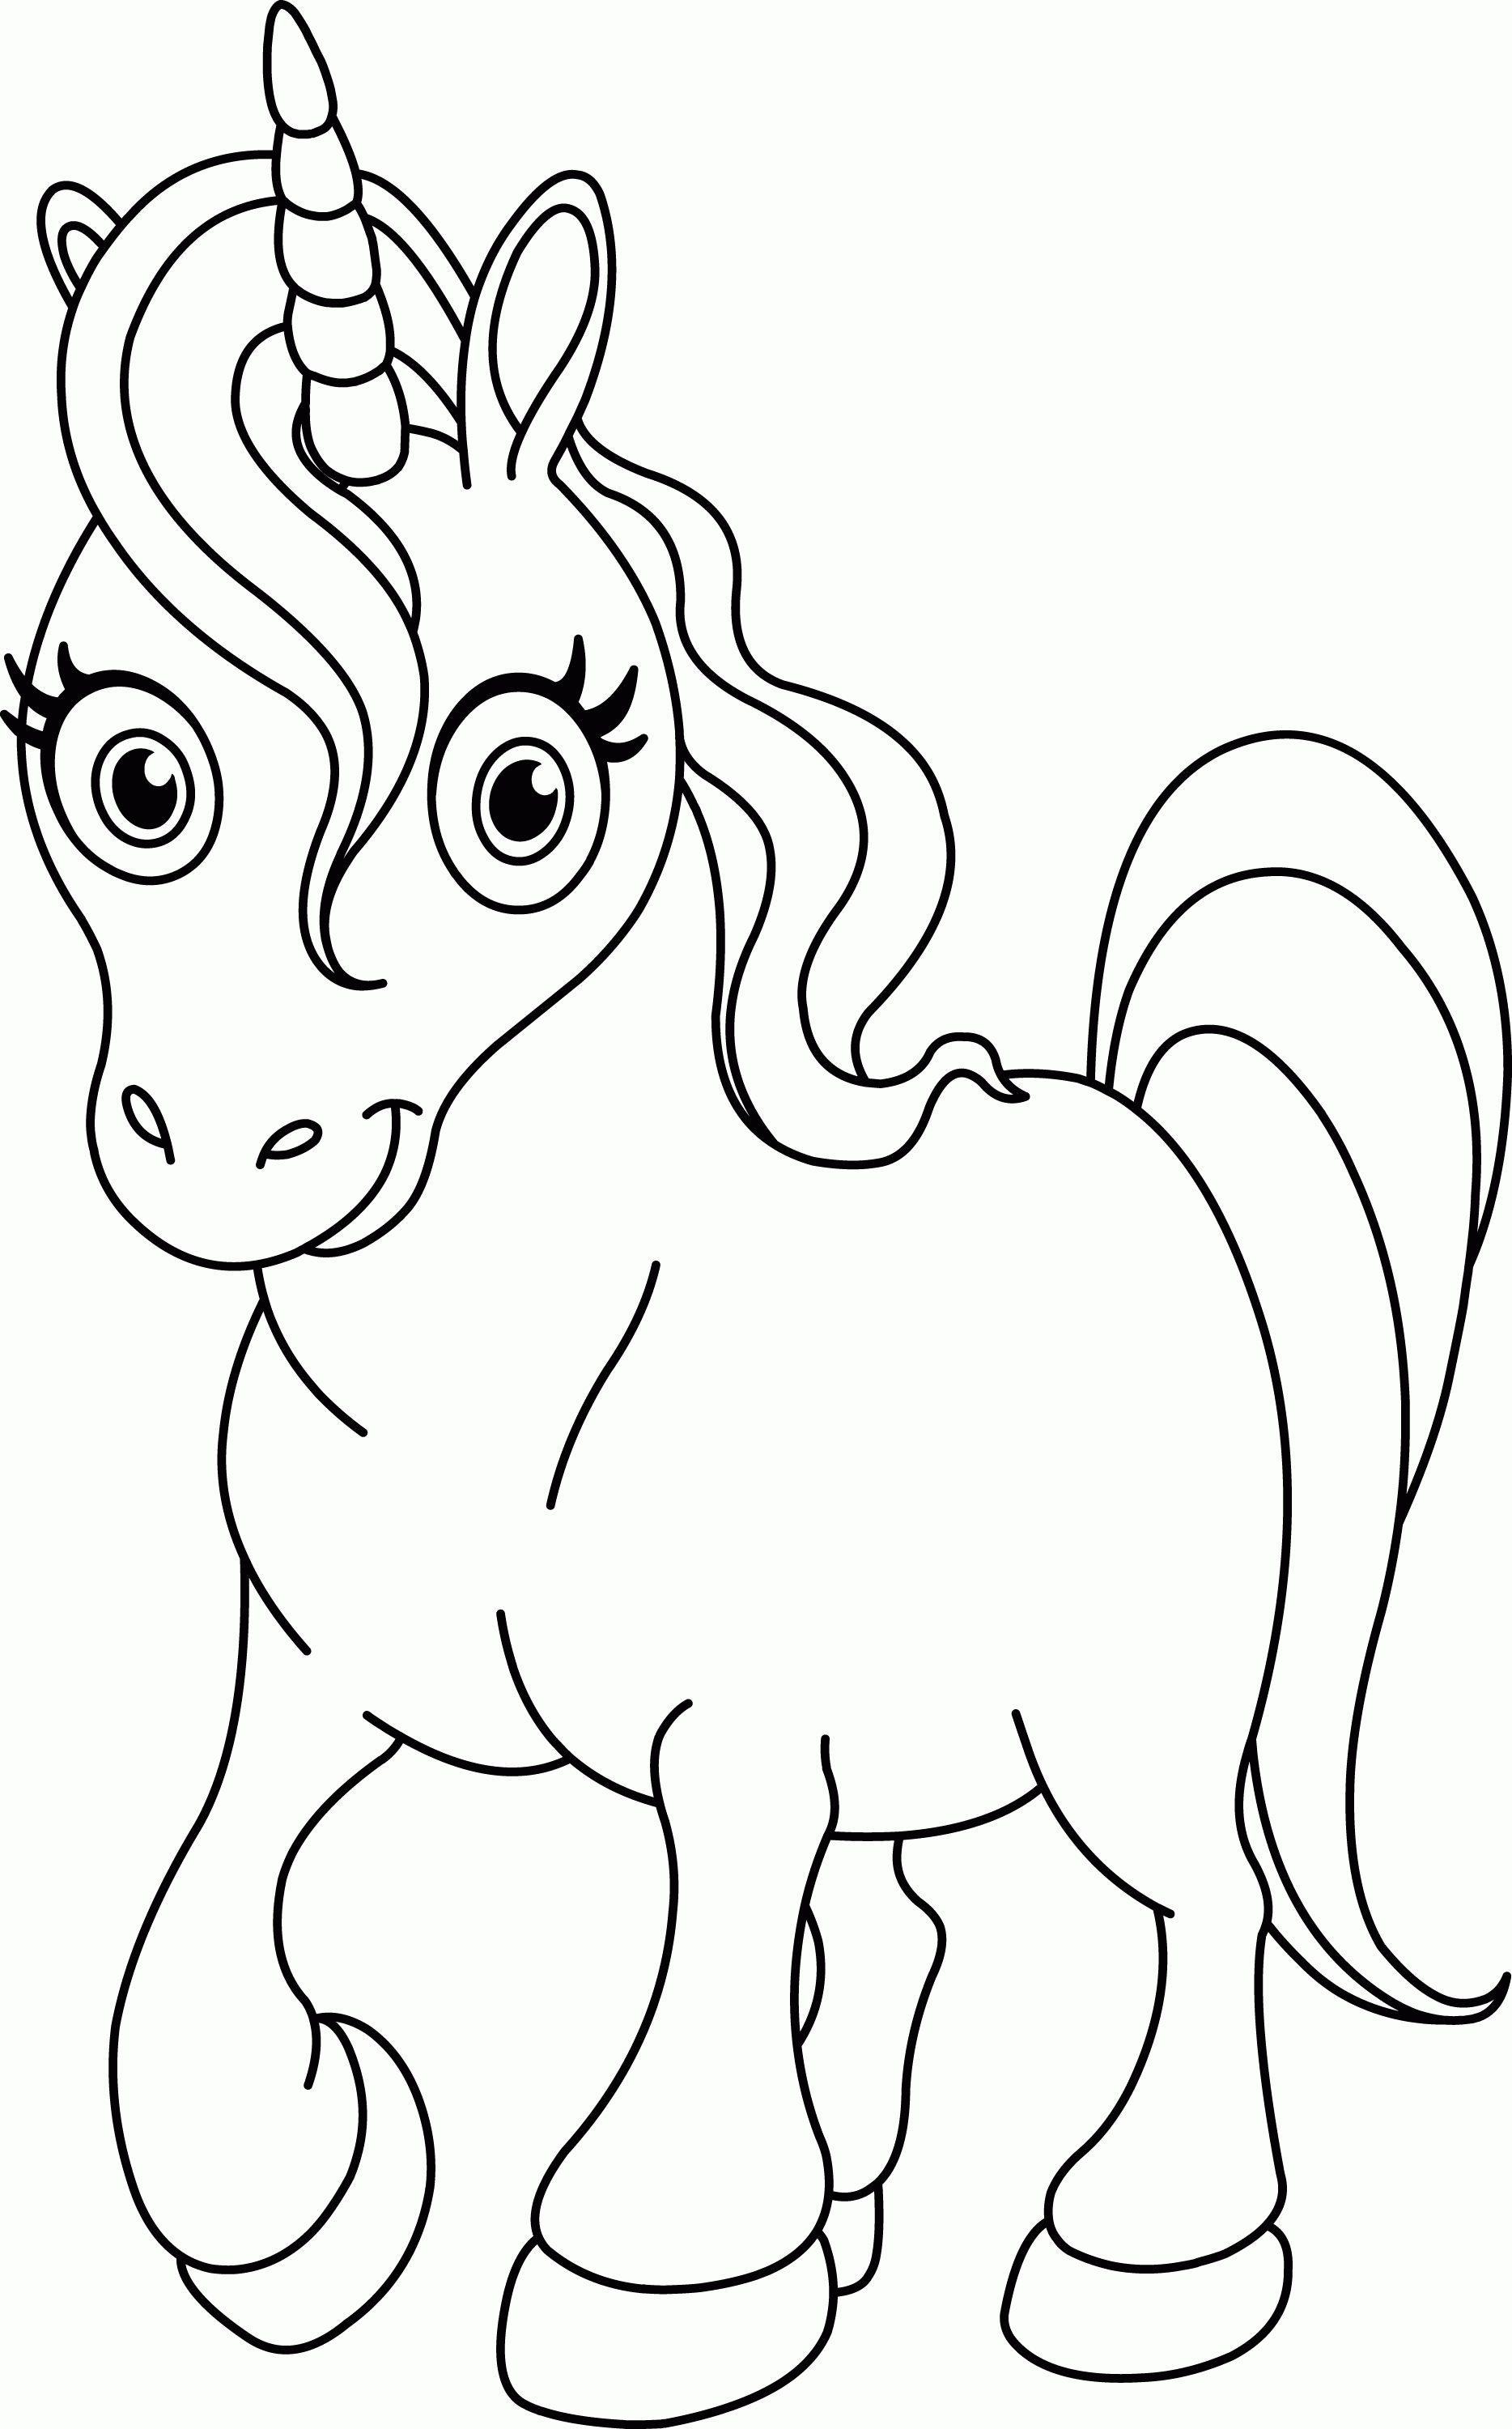 Unicorn Coloring Pages Online Printable Unicorn Coloring Page Coloring Home